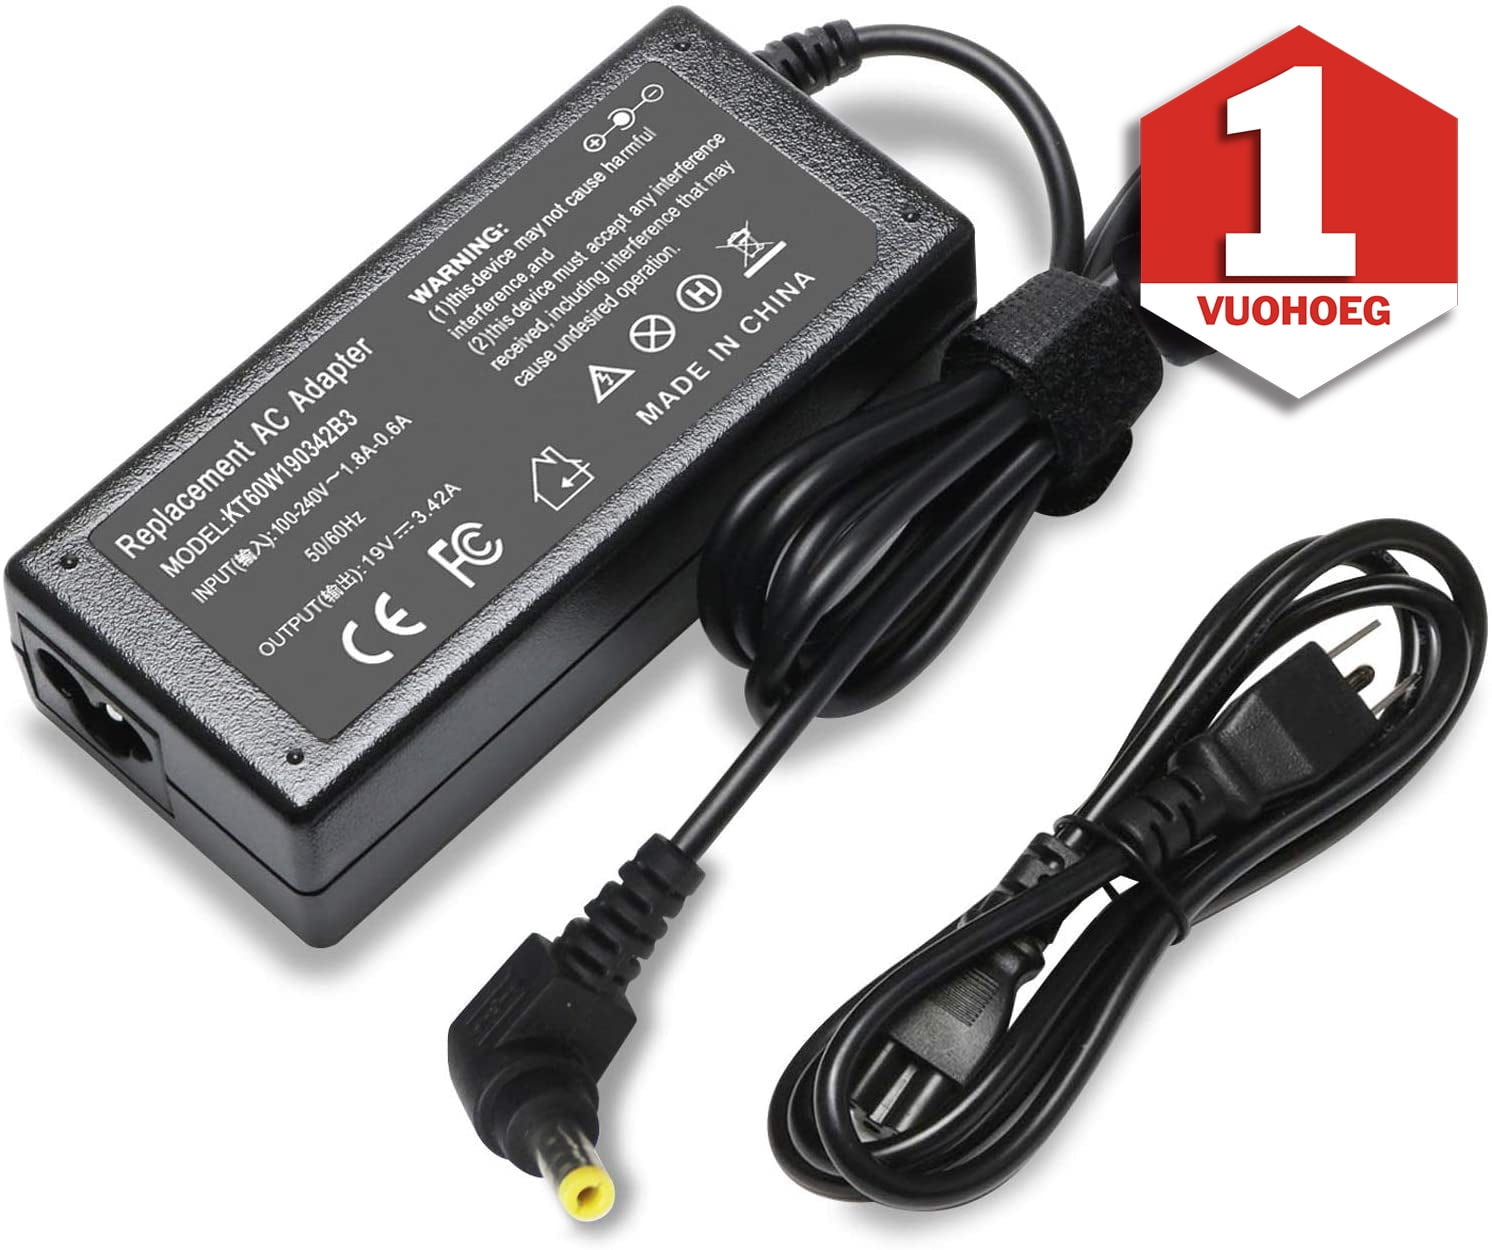 AC Adapter Cord Battery Charger For Toshiba Satellite C55-B5299 C55-B5300  Laptop 